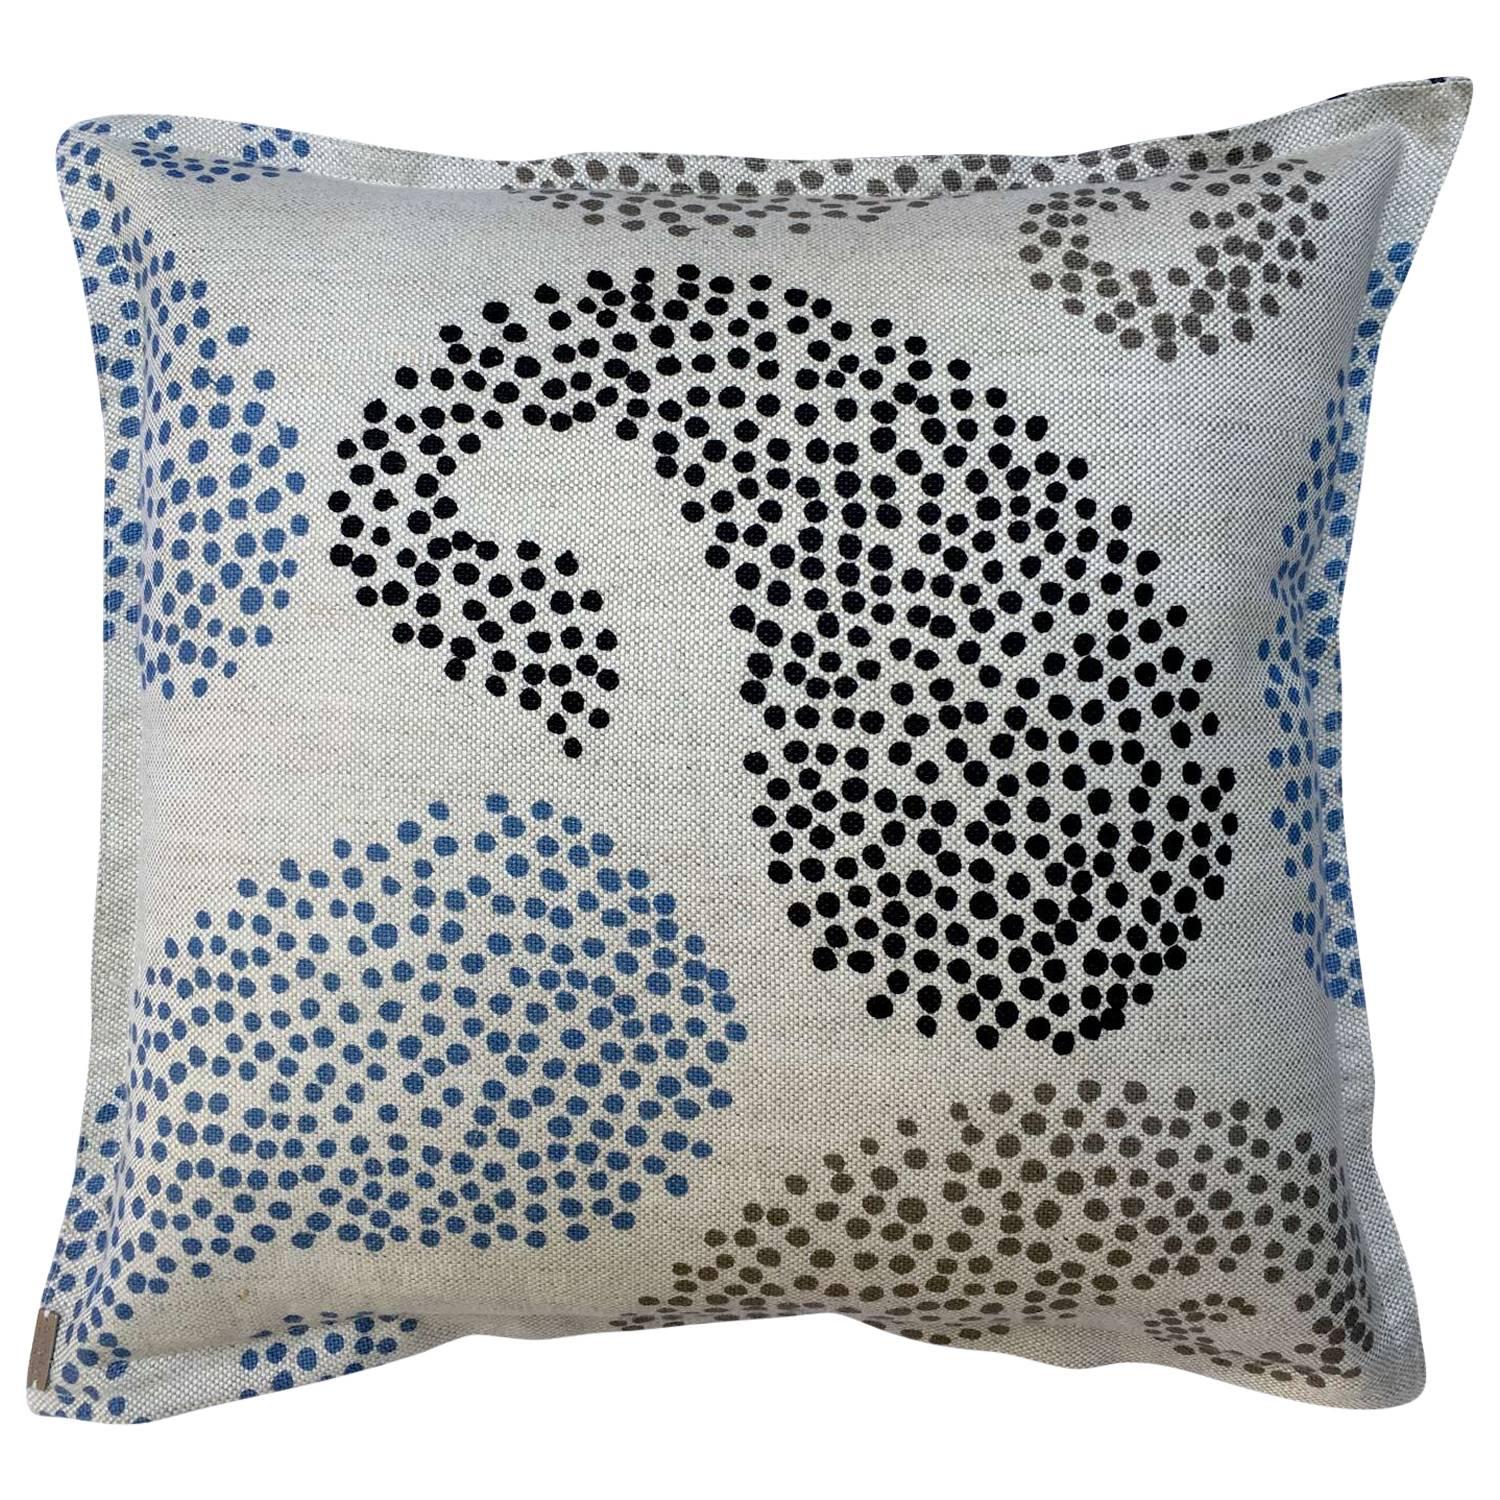 Charcoal Paisley on Wheat Cotton Linen Pillow For Sale